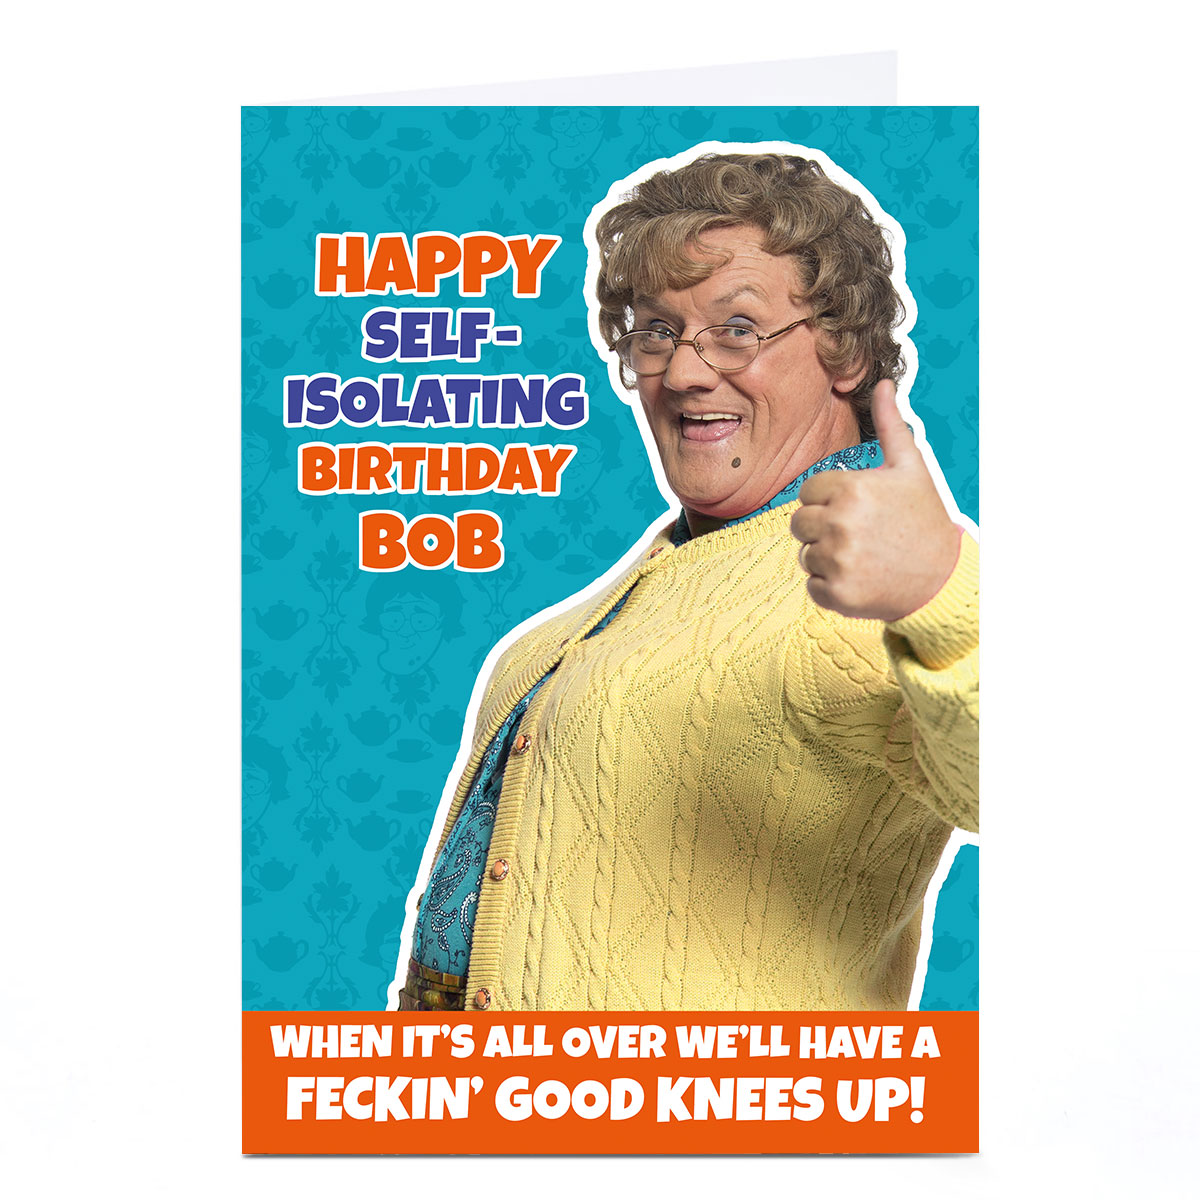 Personalised Mrs. Brown's Boys Birthday Card - Self-Isolating